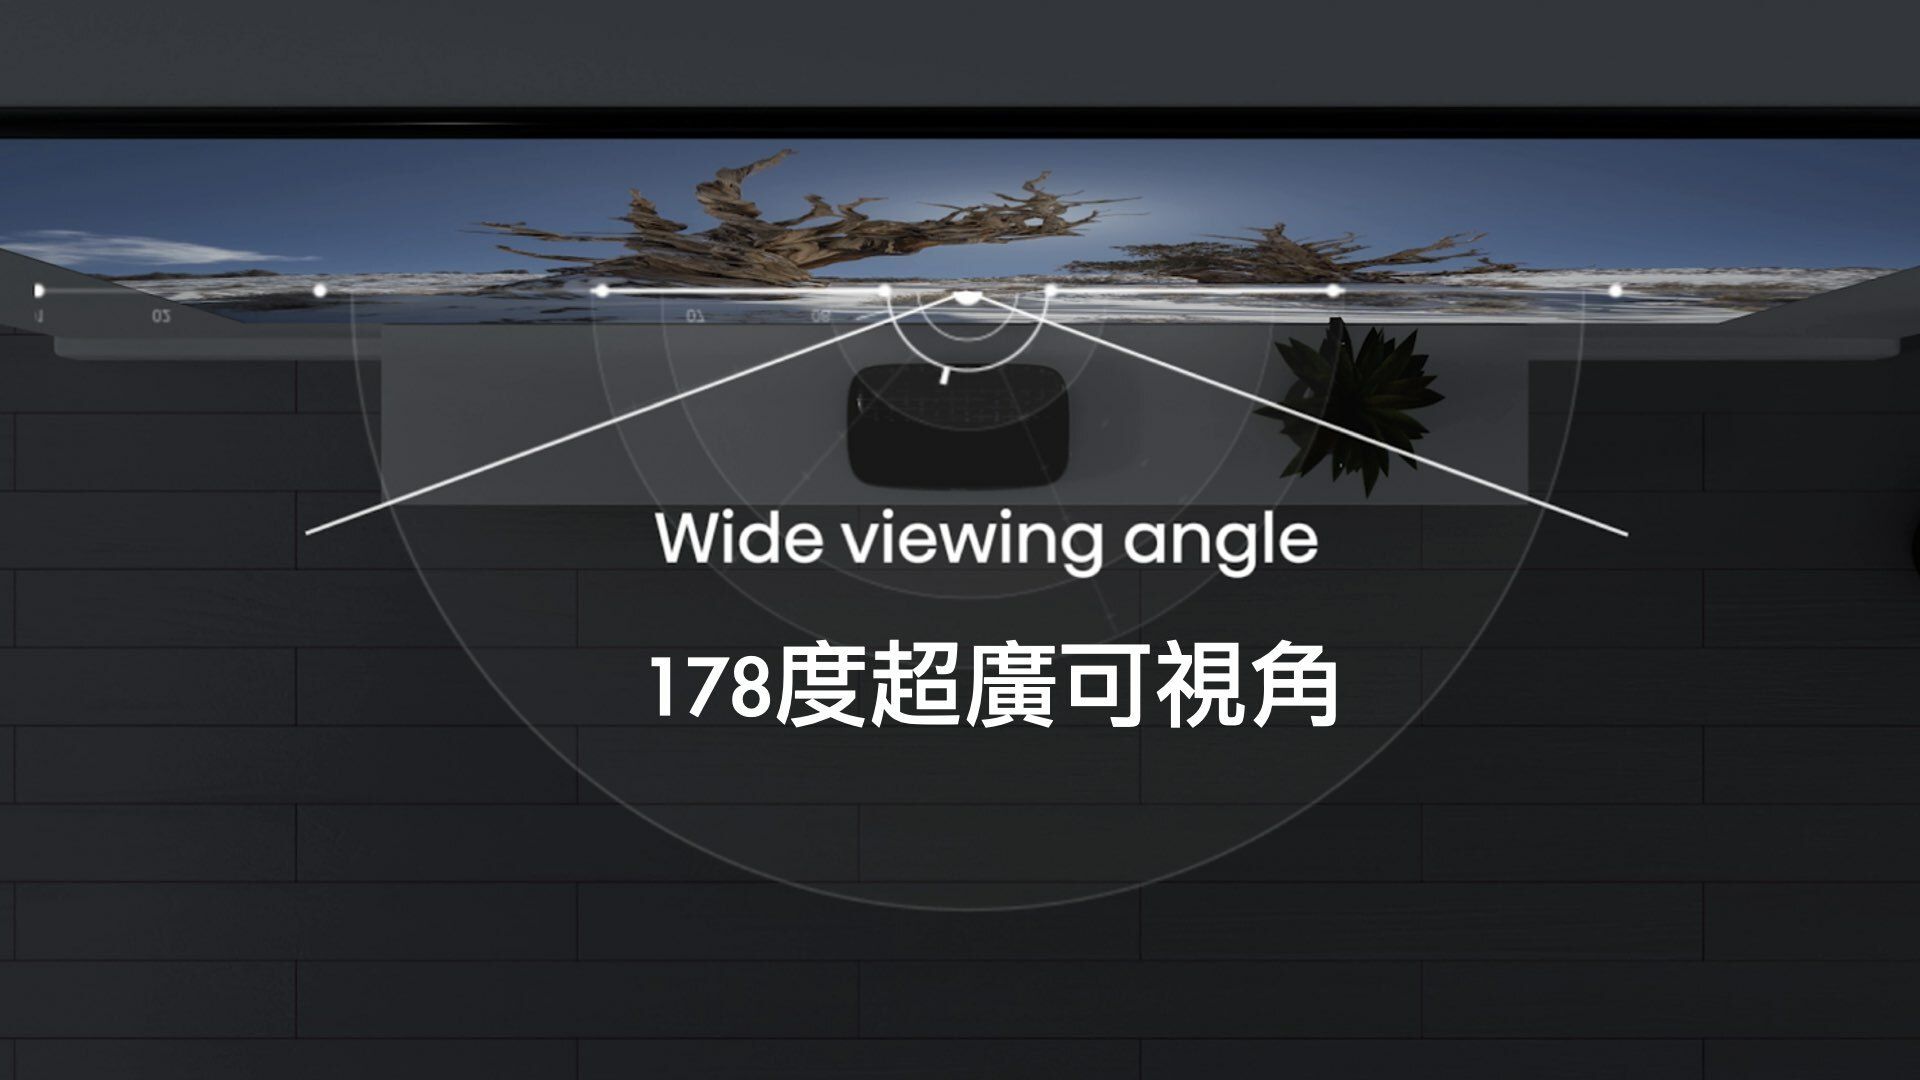 03Wide viewing angle178度超廣可視角